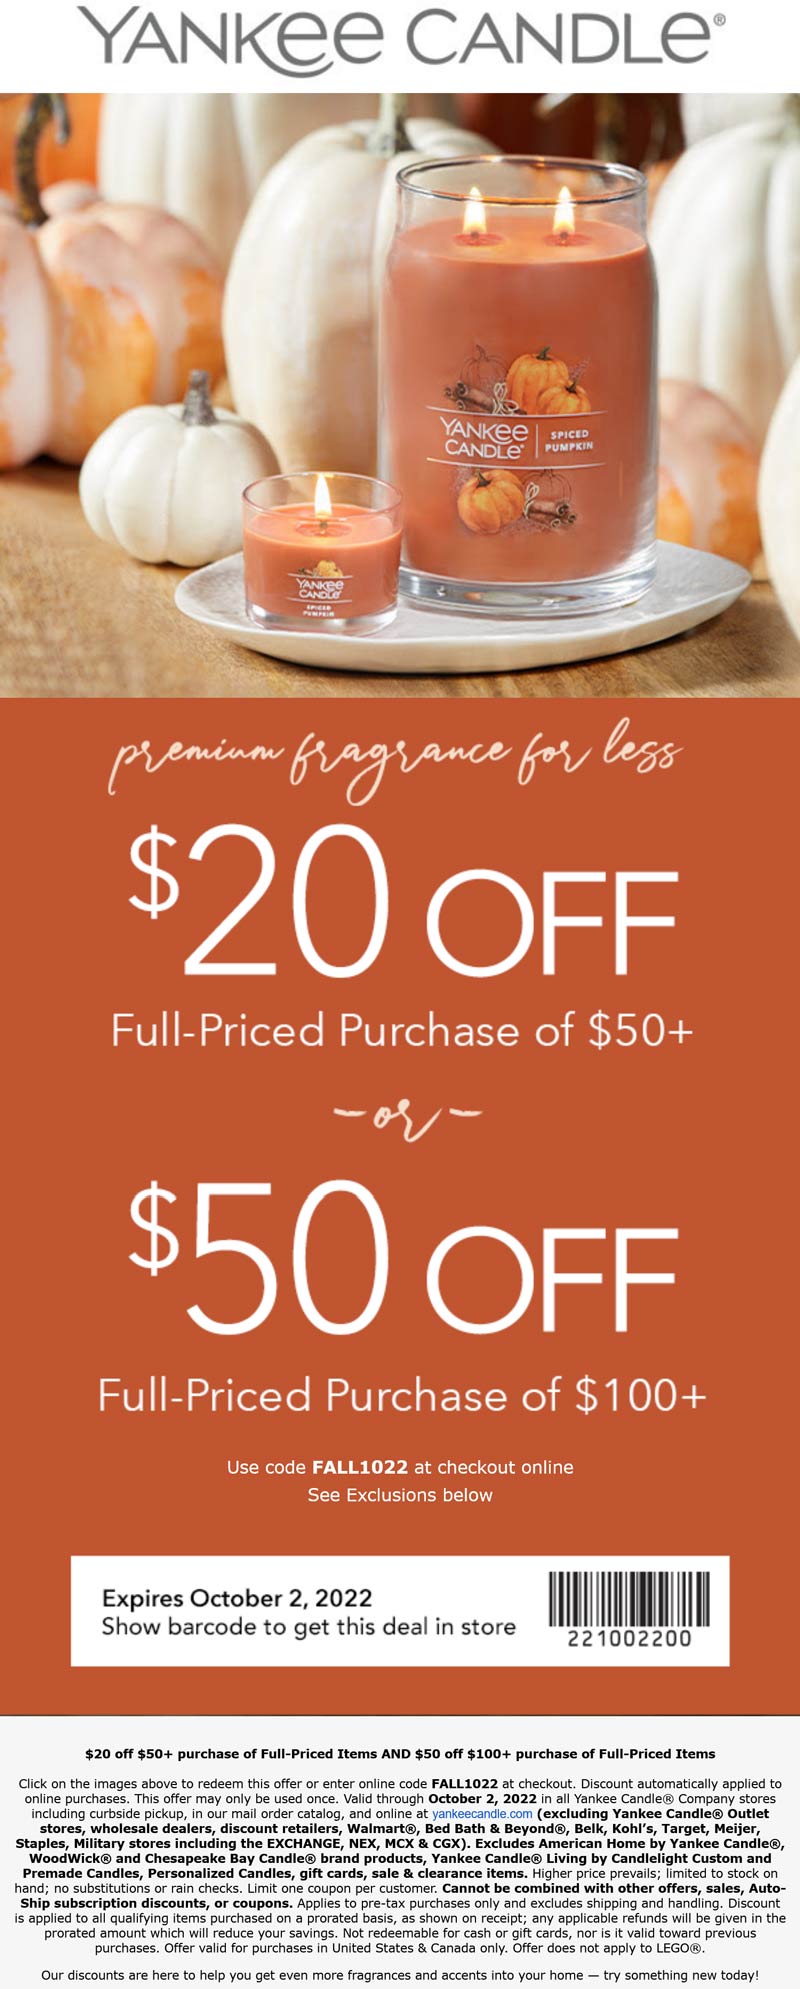 Yankee Candle stores Coupon  $20 off $50 & more at Yankee Candle, or online via promo code FALL1022 #yankeecandle 